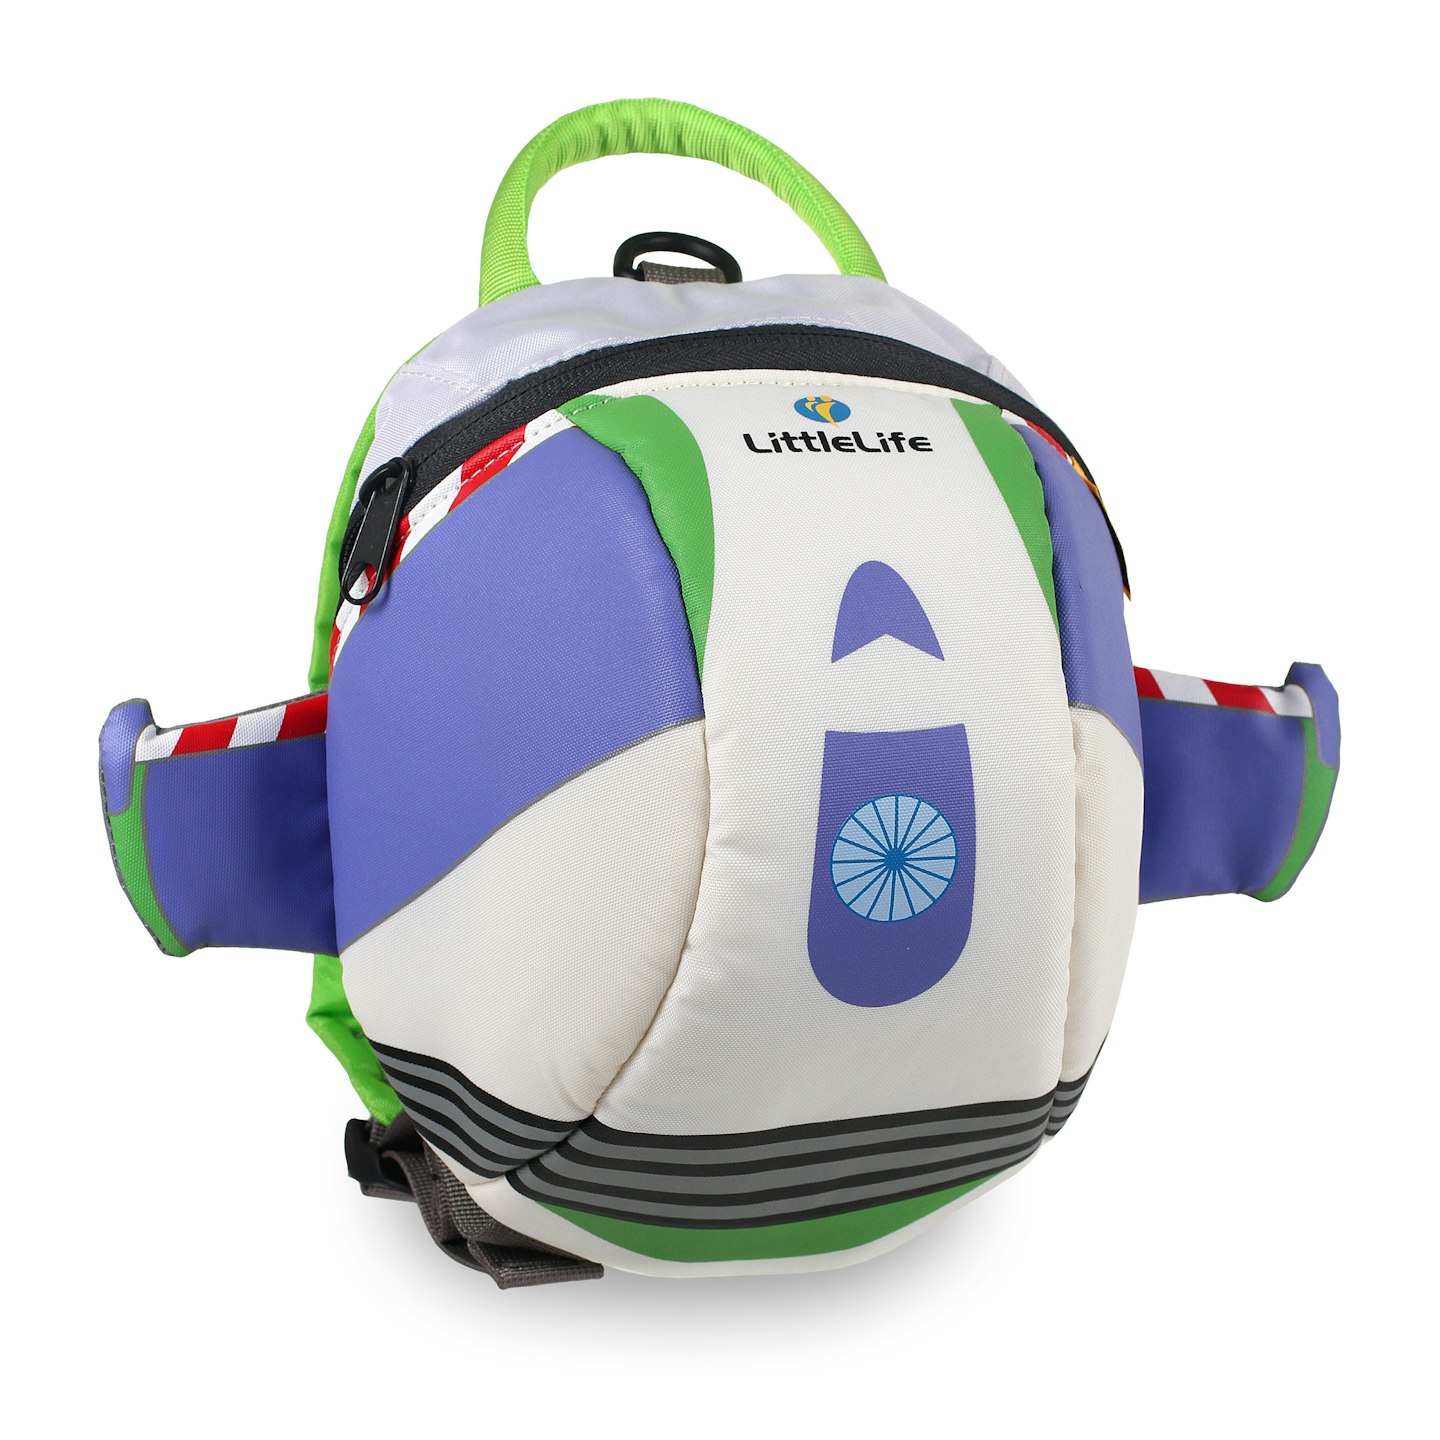 LittleLife Buzz Lightyear Toddler Backpack with Reins 